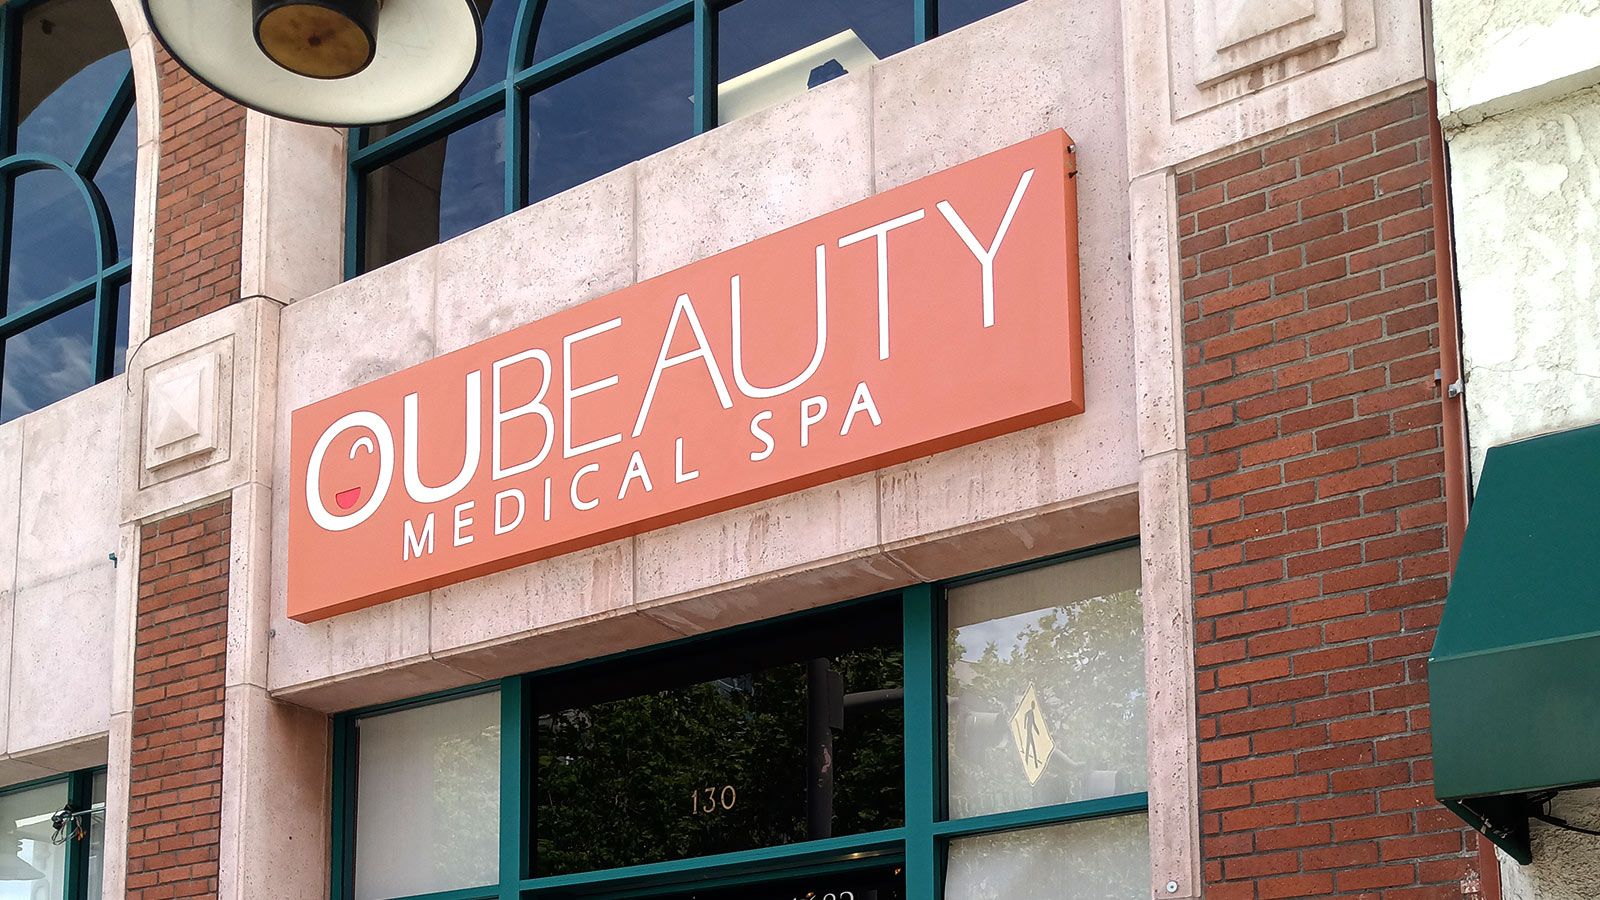 OUbeauty outdoor sign